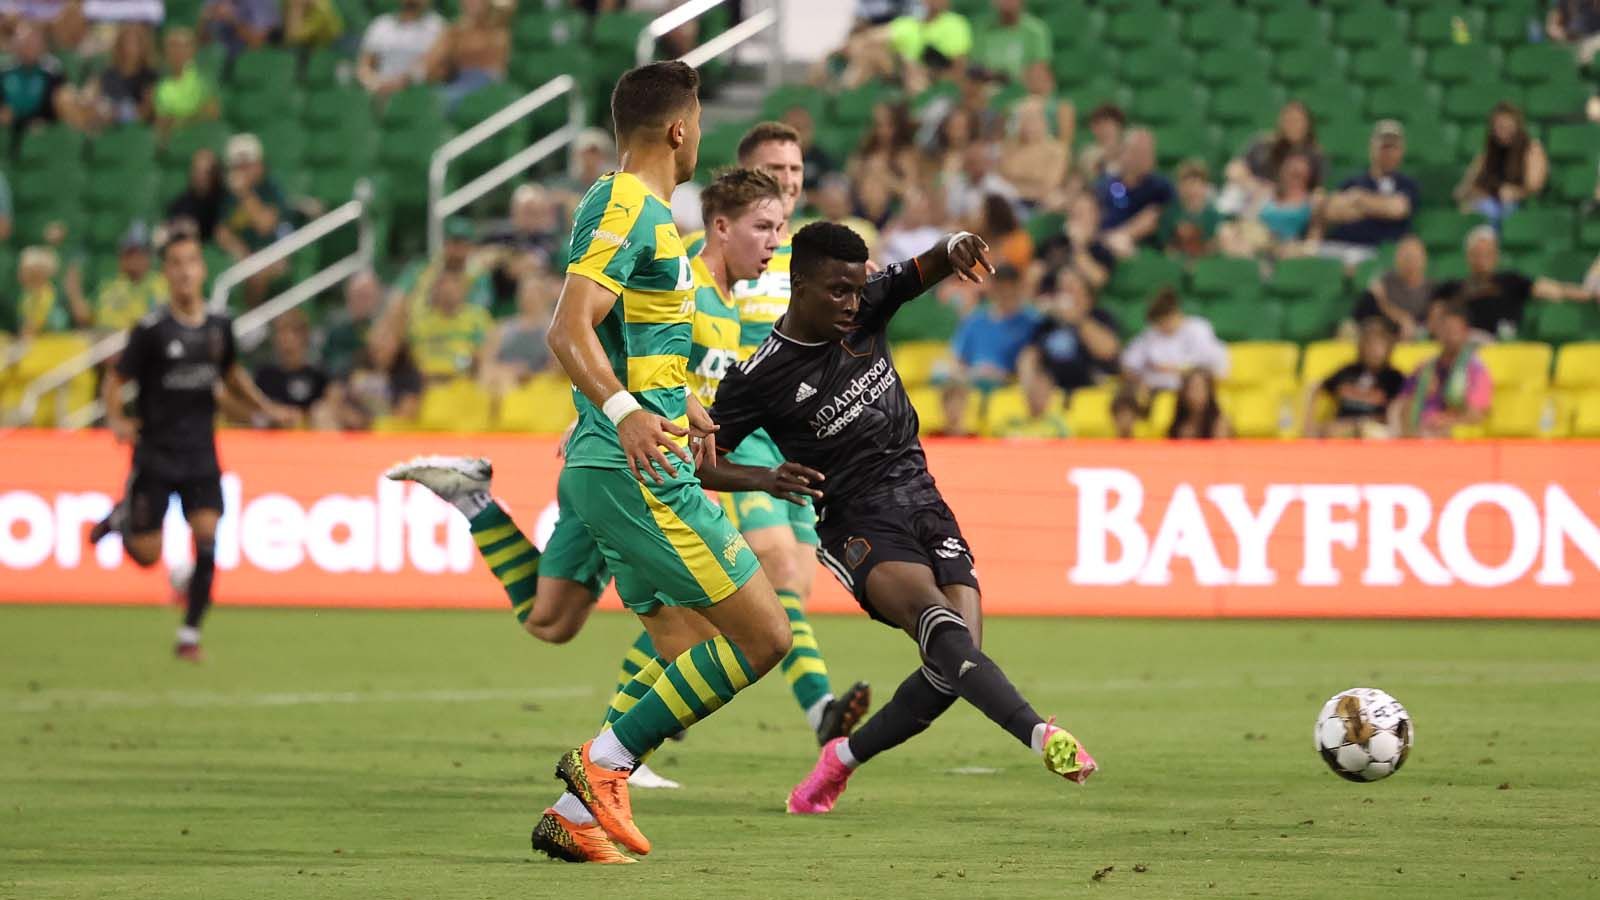 Rowdies midfielder has Tampa Bay running in the right direction